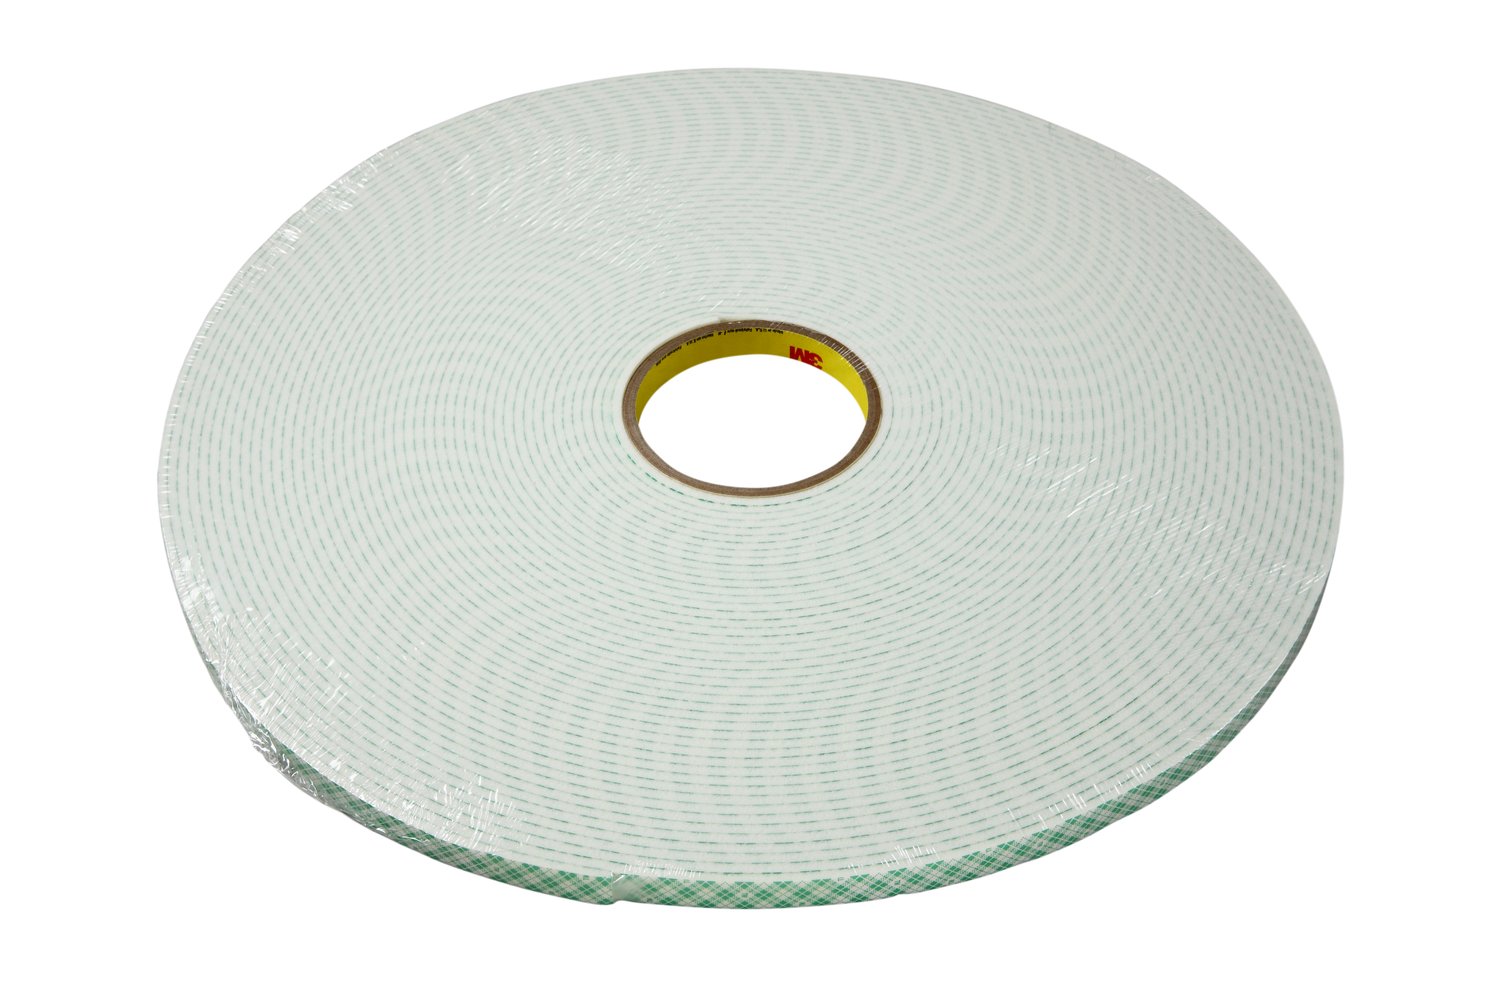 7010373246 - 3M Double Coated Urethane Foam Tape 4004, Off White, 2 in x 18 yd, 250
mil, 6 rolls per case